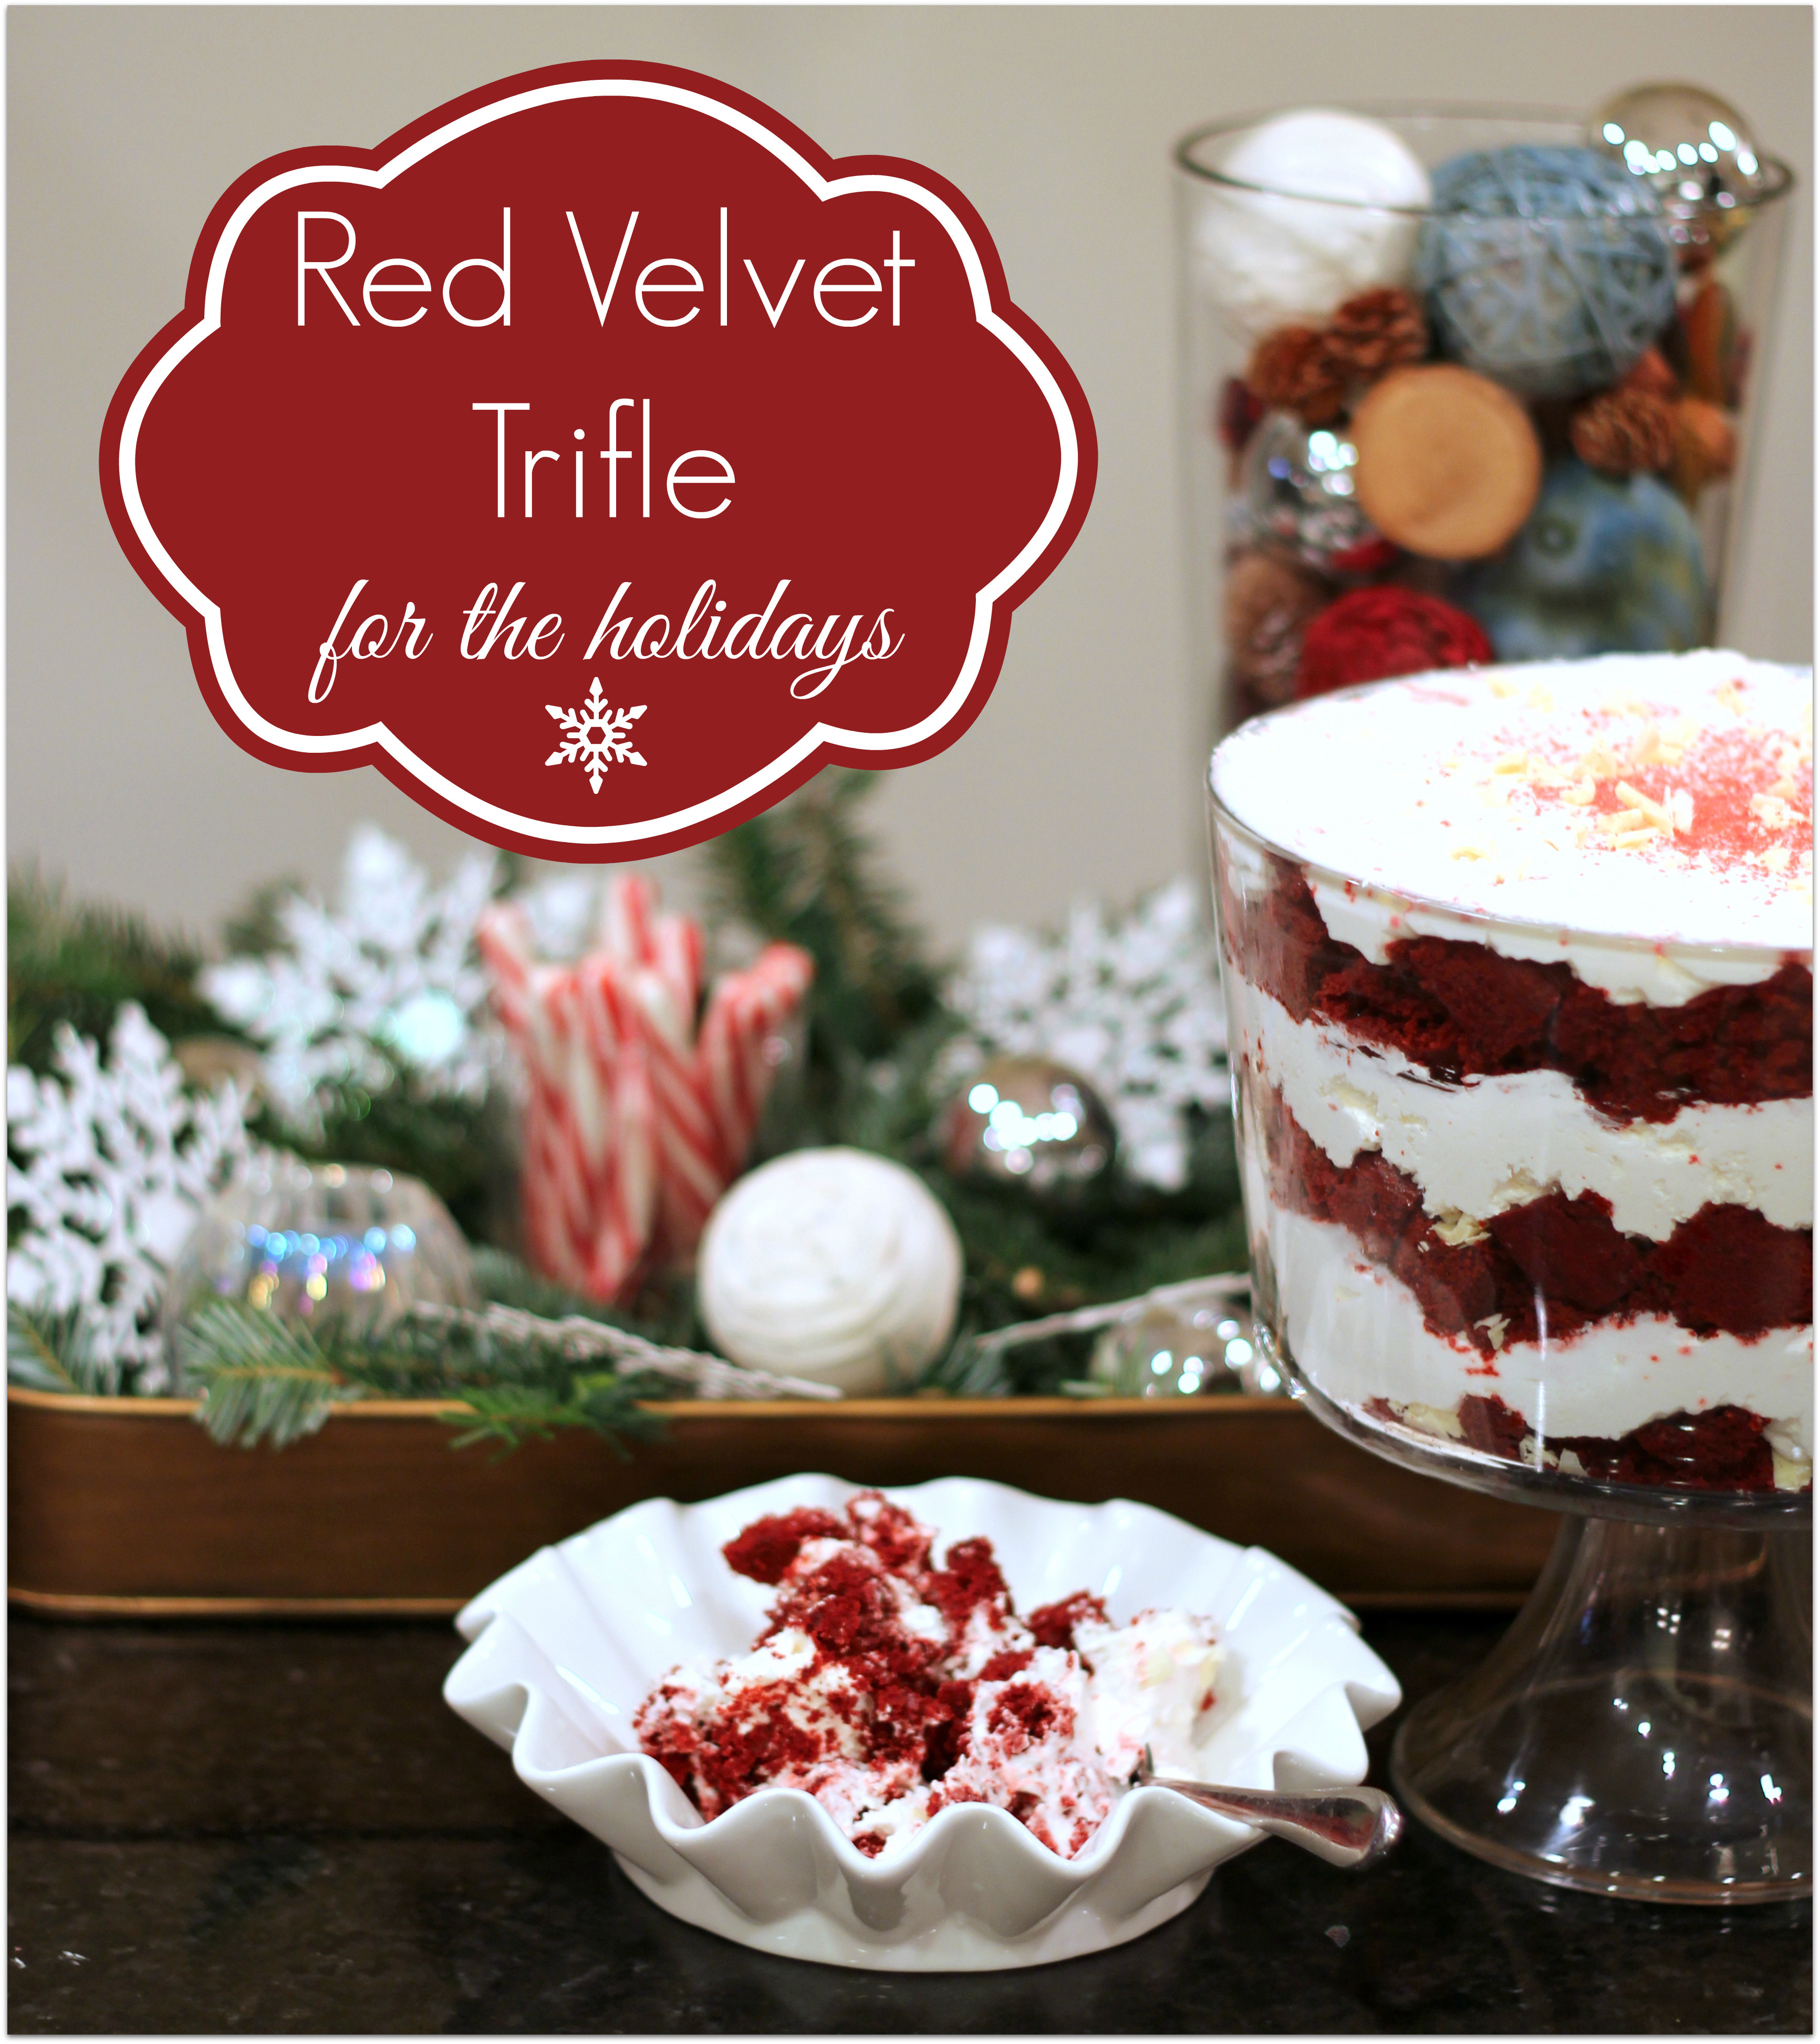 Great Christmas Desserts
 Red Velvet Trifle a recipe for the holidays Artsy